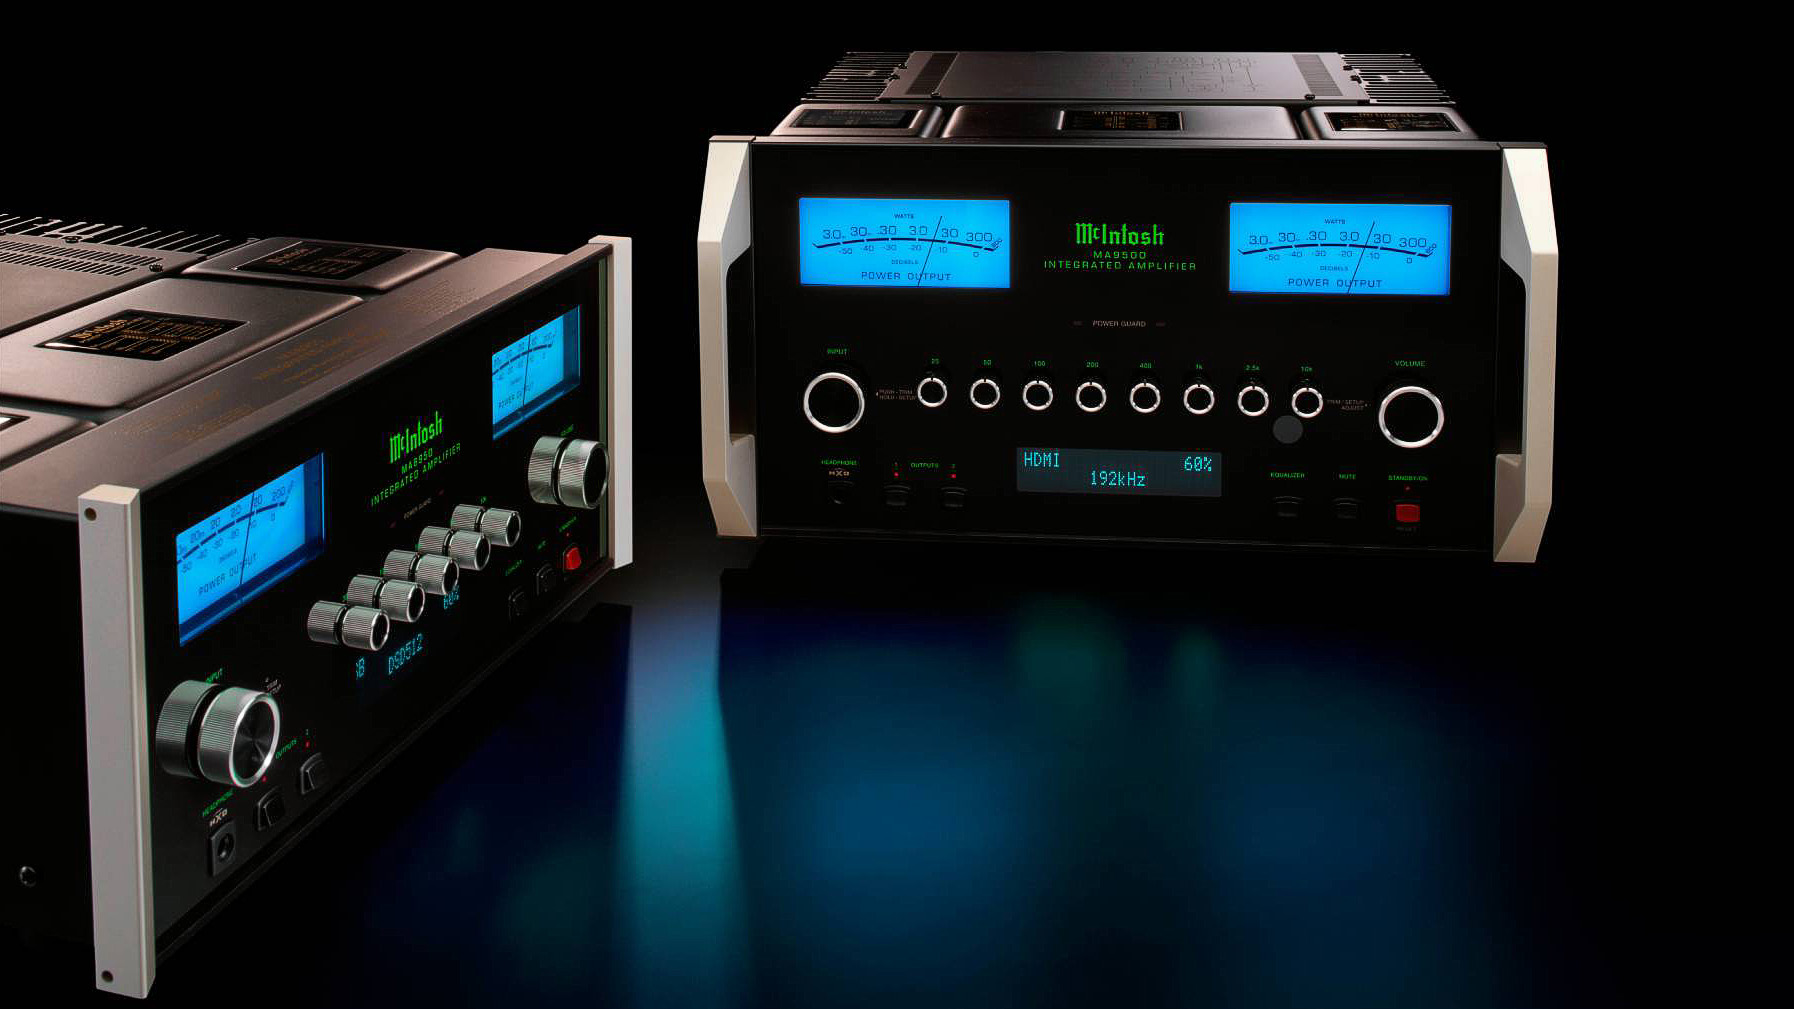 The models MA9500 AC and MA8950 are said to be available in early 2022. (Image Credit: McIntosh)